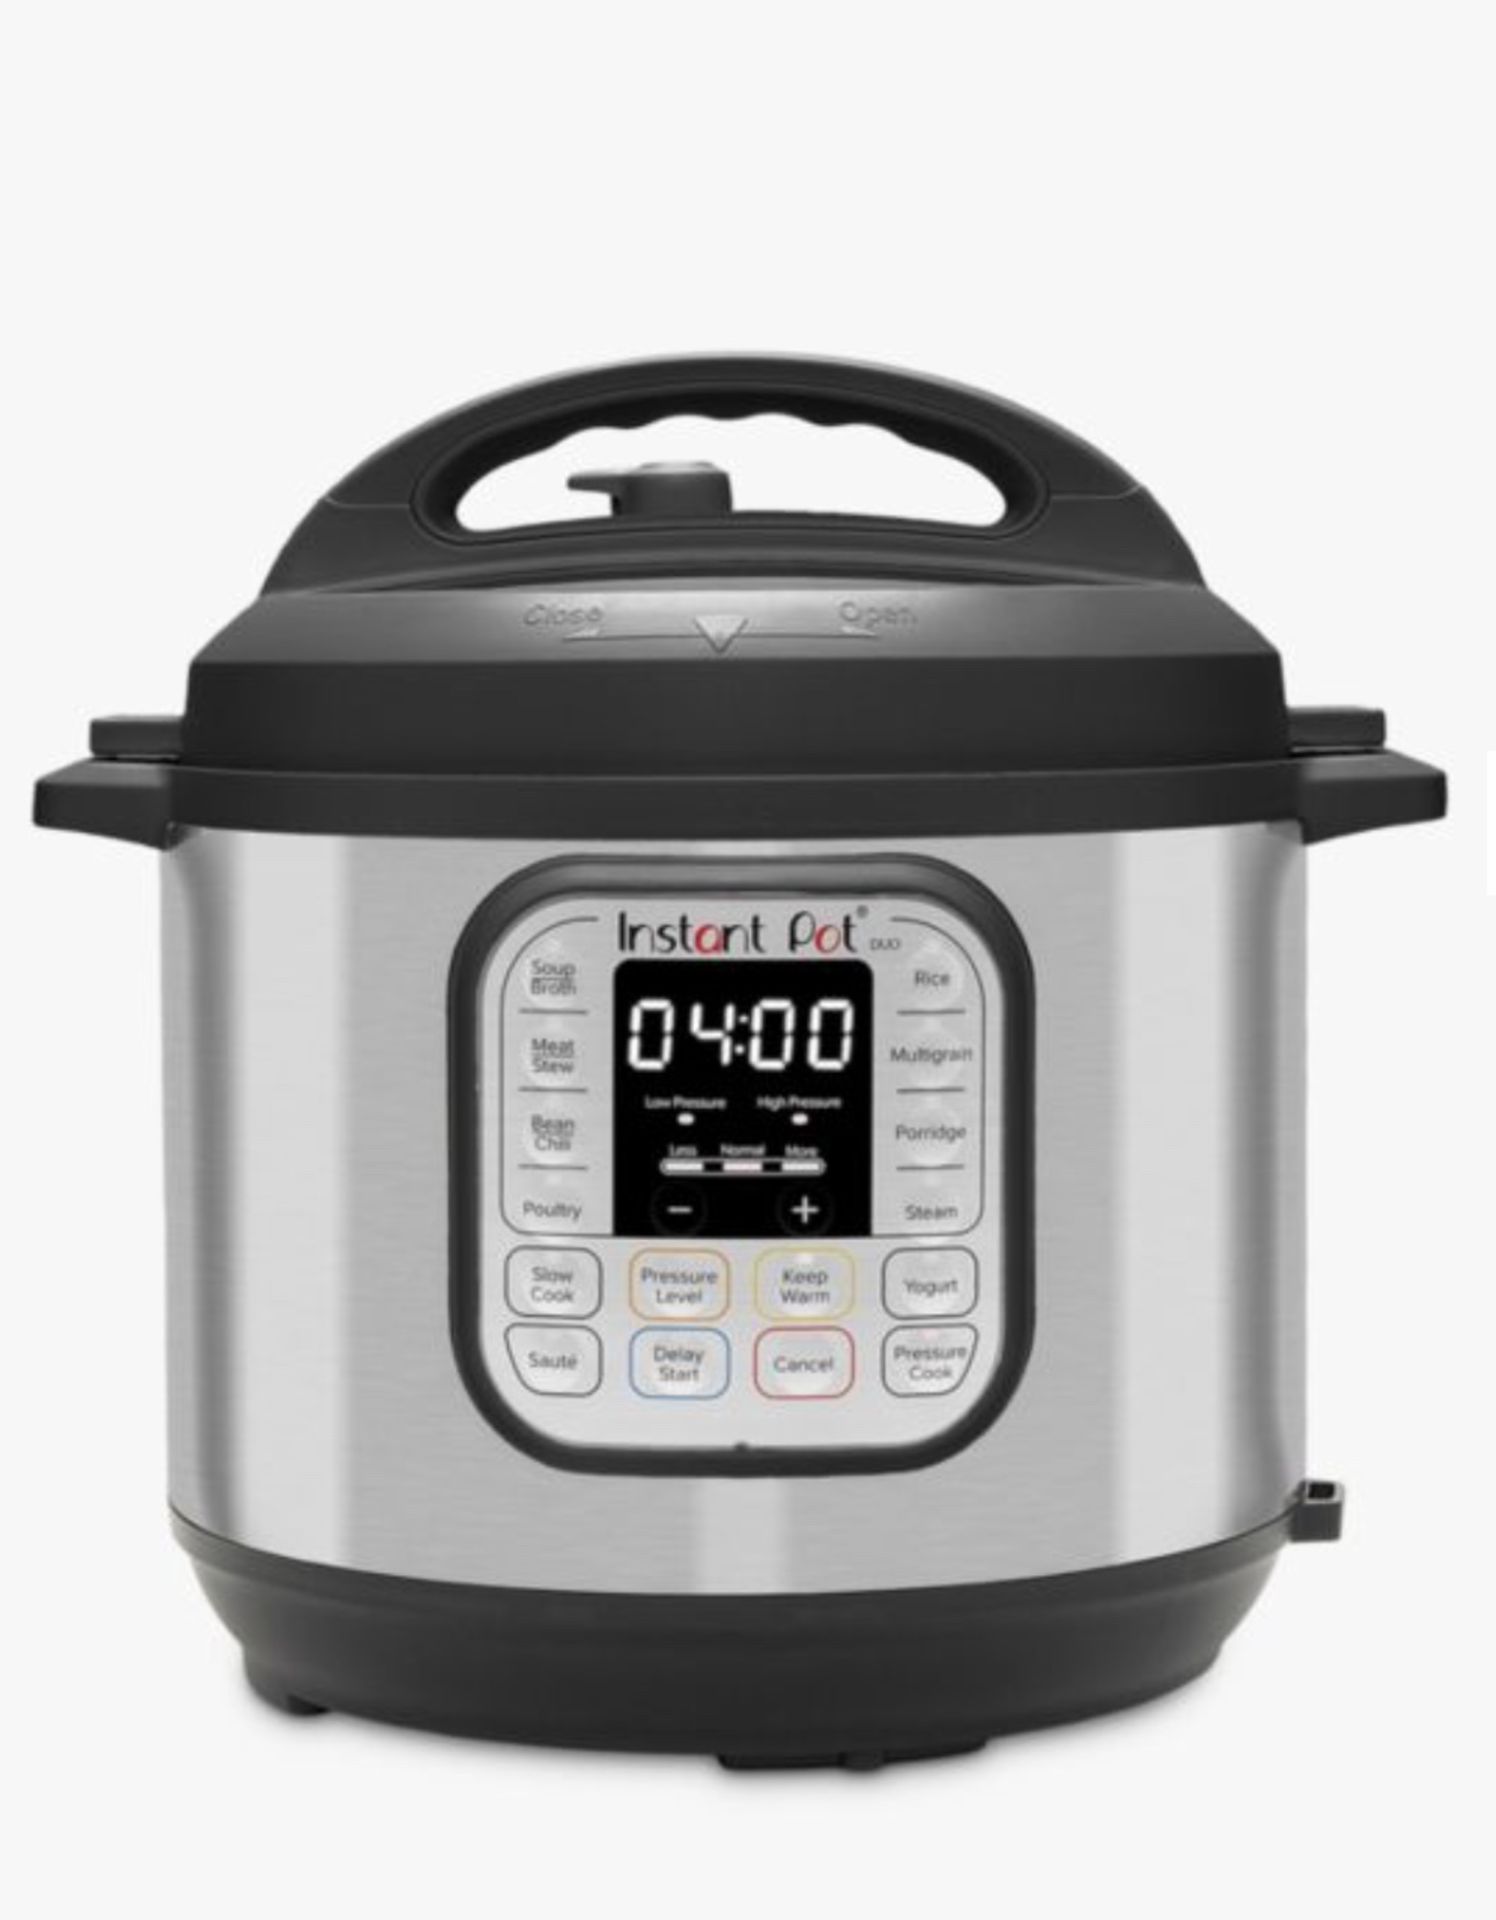 Instant Duo 6 7-in-1 Multi-Use Electric Pressure Cooker, 5.7L, Stainless Steel RRP £89.99